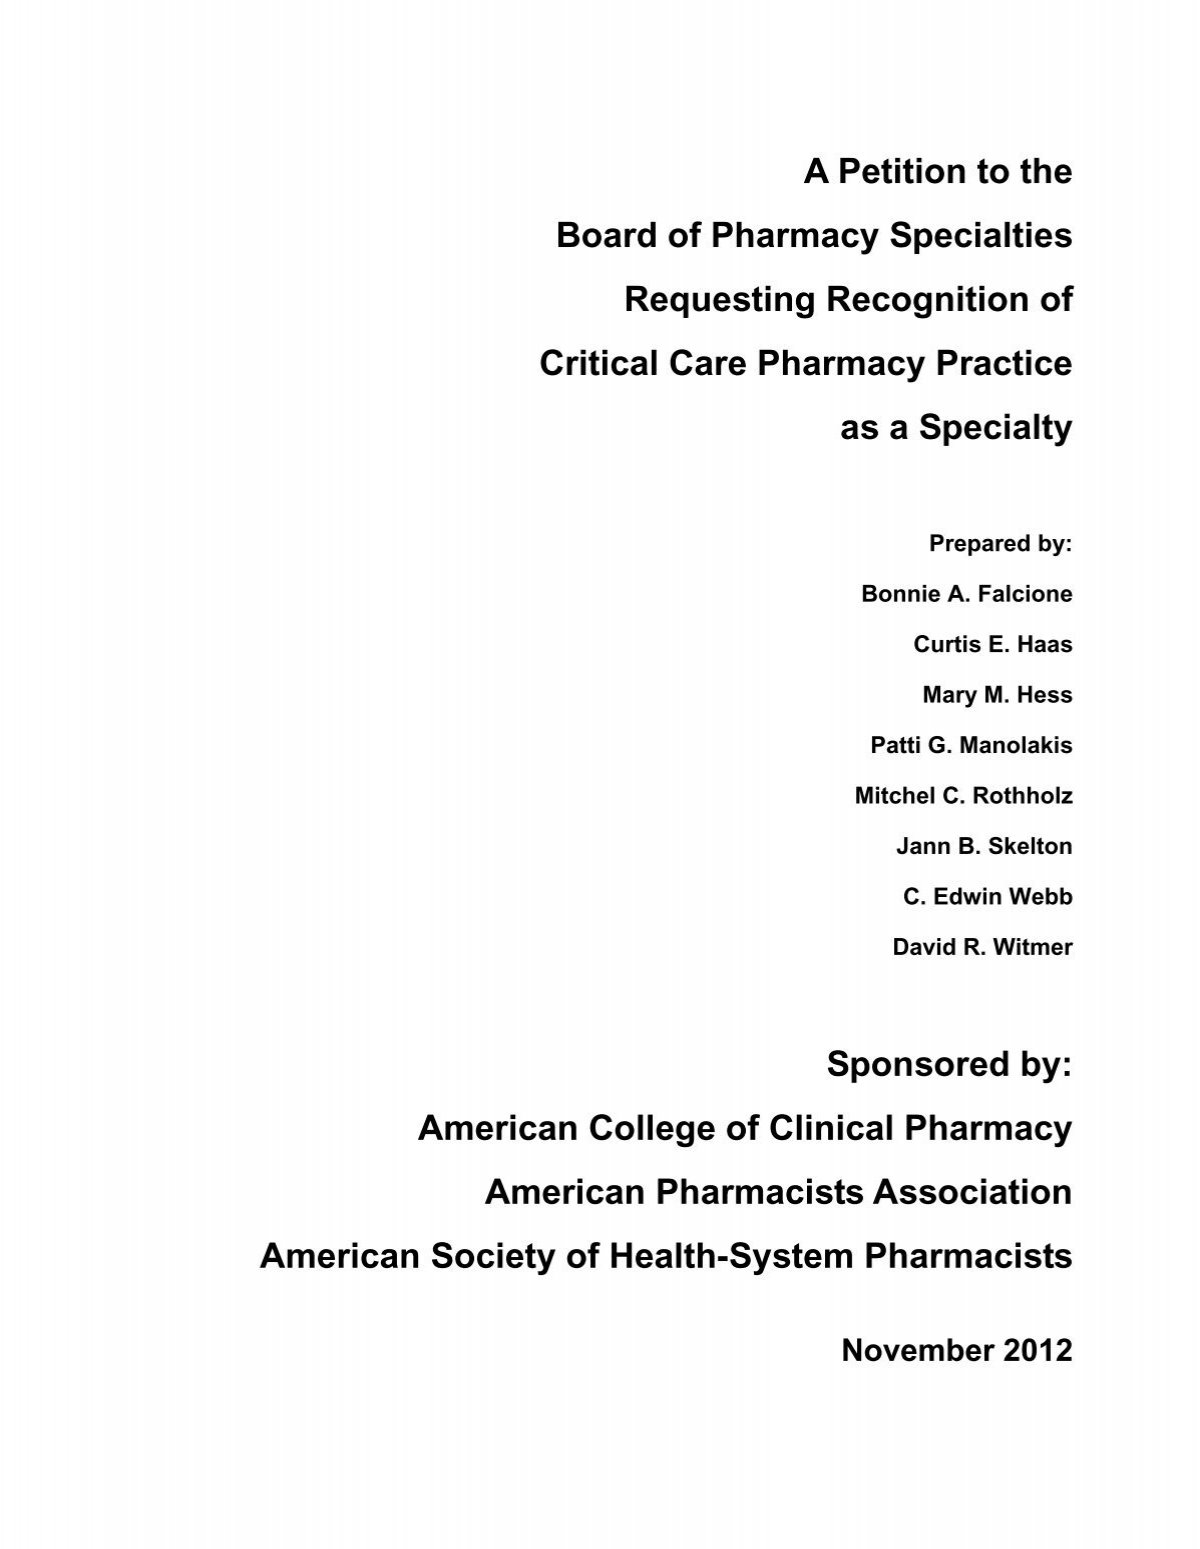 A Petition To The Board Of Pharmacy Specialties Requesting Accp - greenville roblox mansion code 336